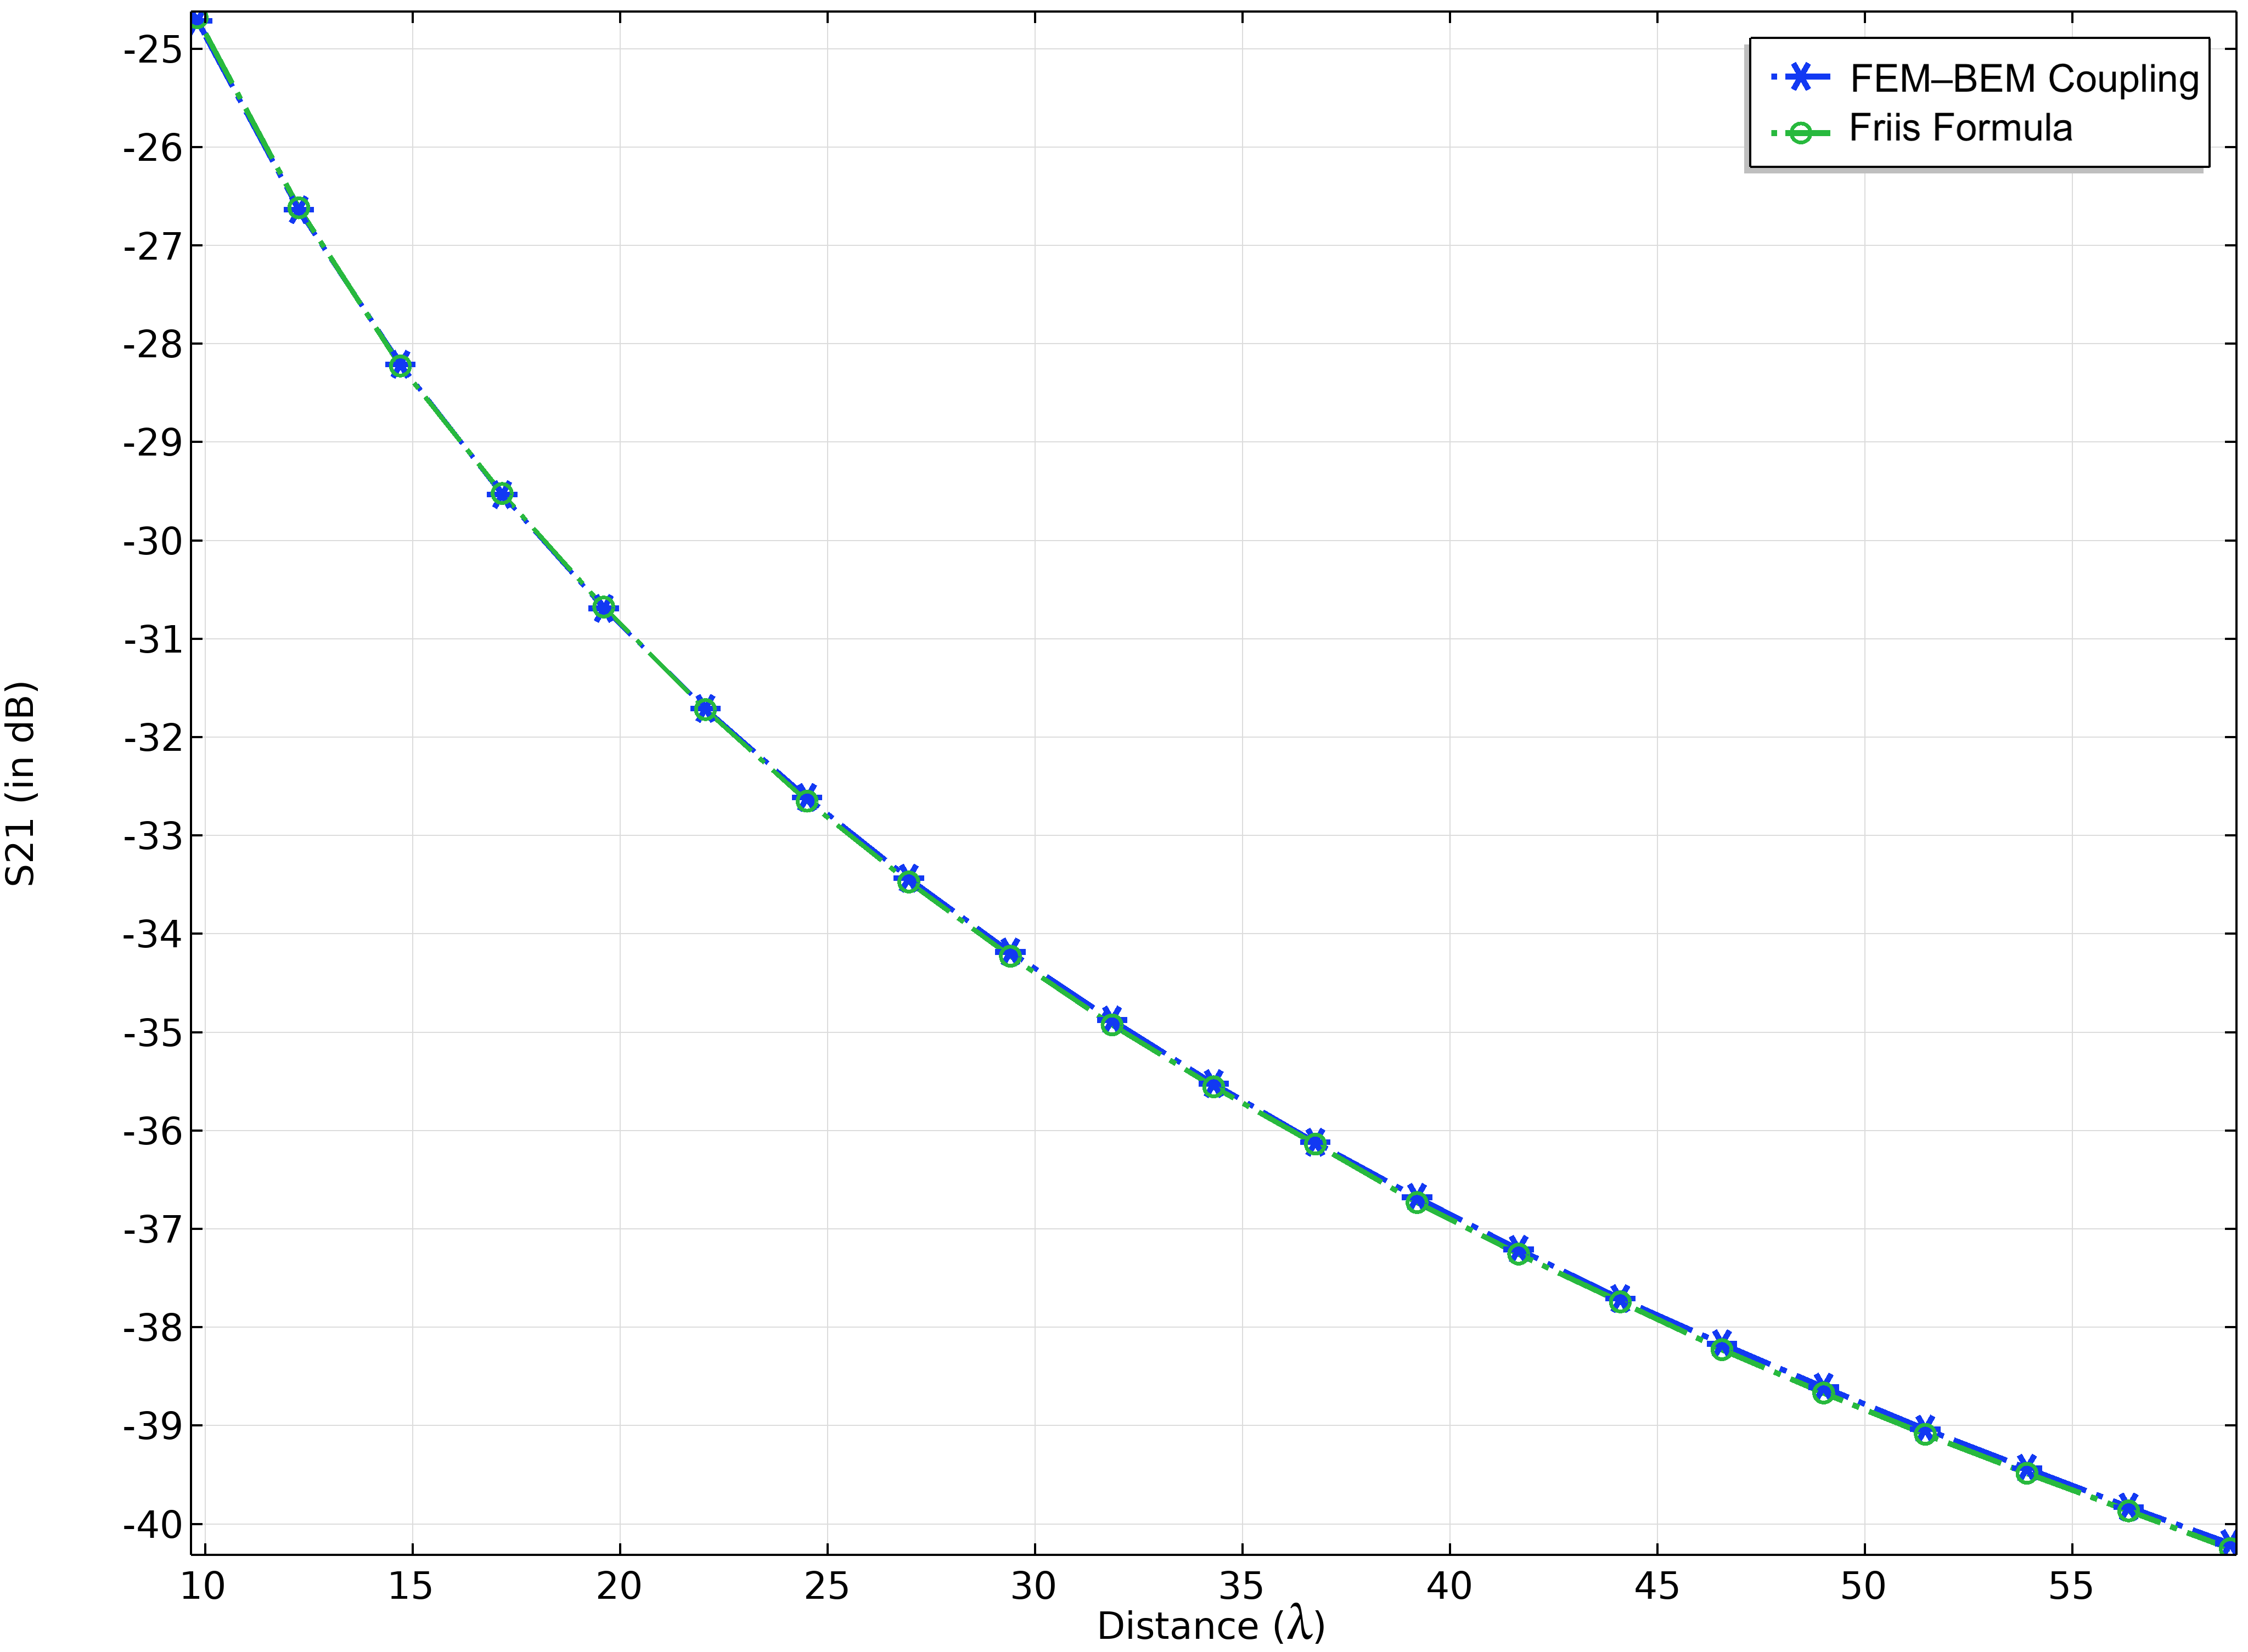 A 1D plot with Distance (lambda) on the x-axis and S21 (in dB) on the y-axis. A key shows that a blue line with an asterisk and a green line with an open circle represents FEM–BEM Coupling and Friis Formula, respectively.